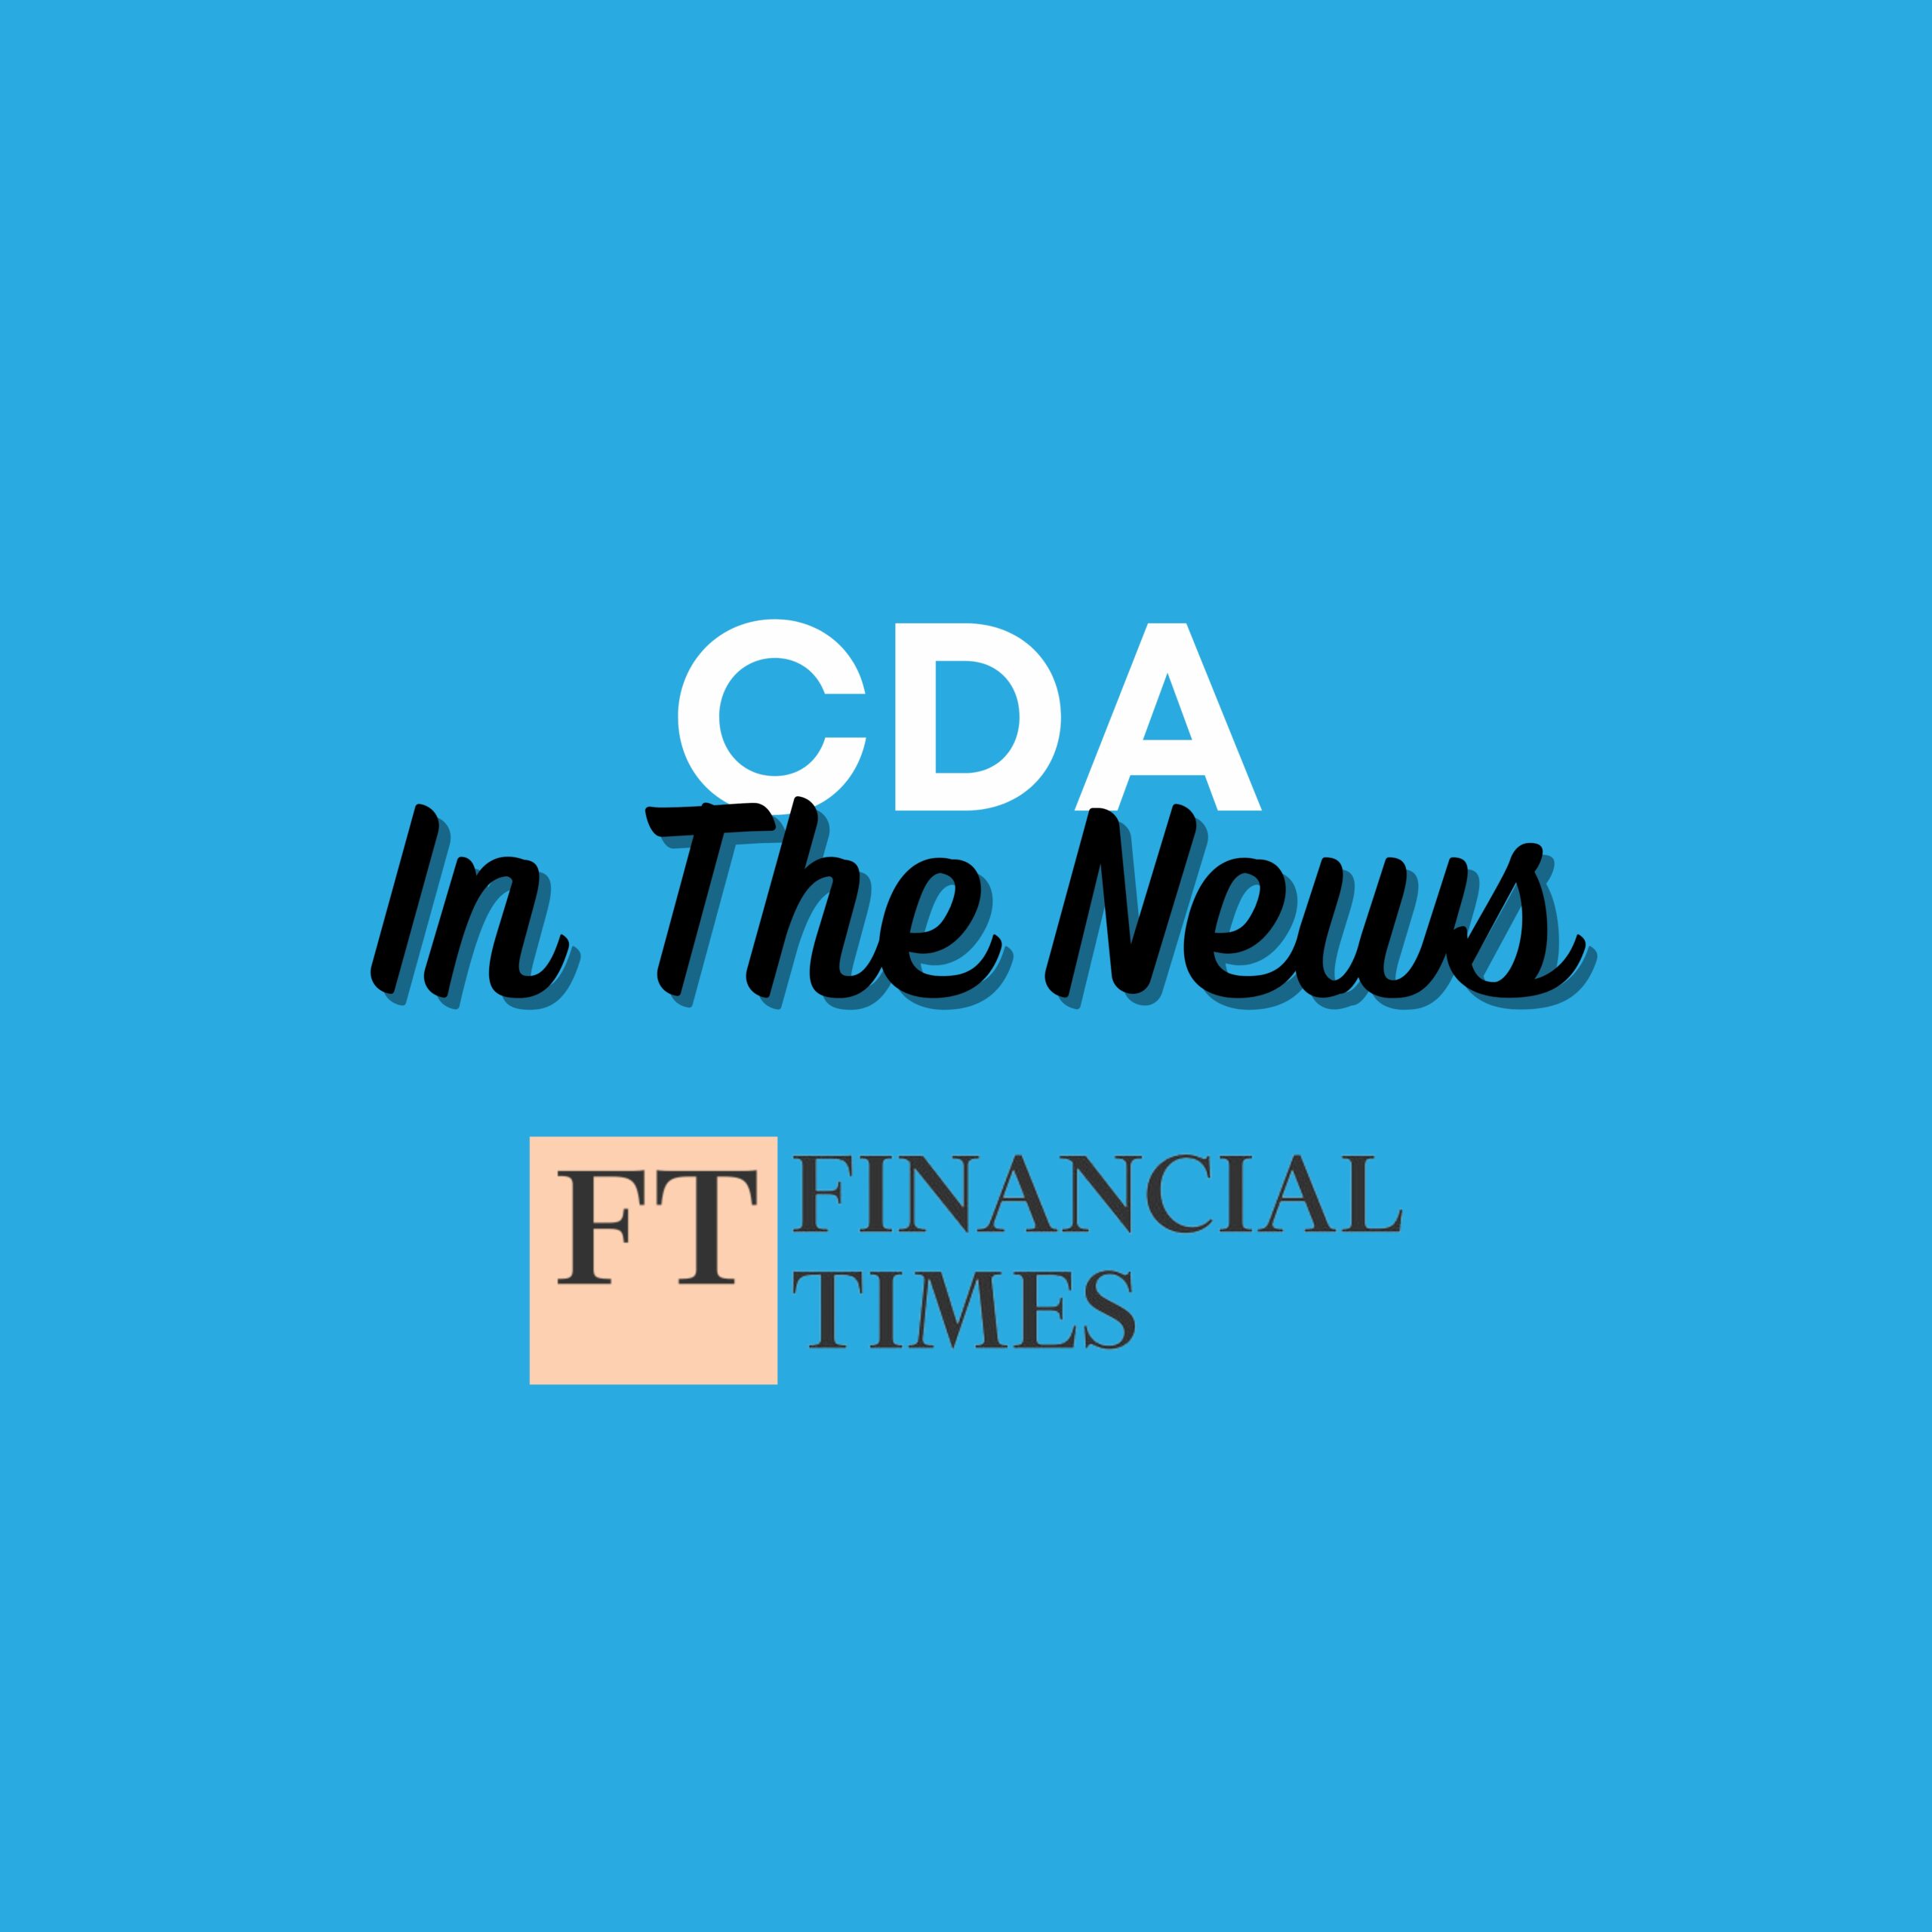 Commercial Drone Alliance CDA In the News Financial Times